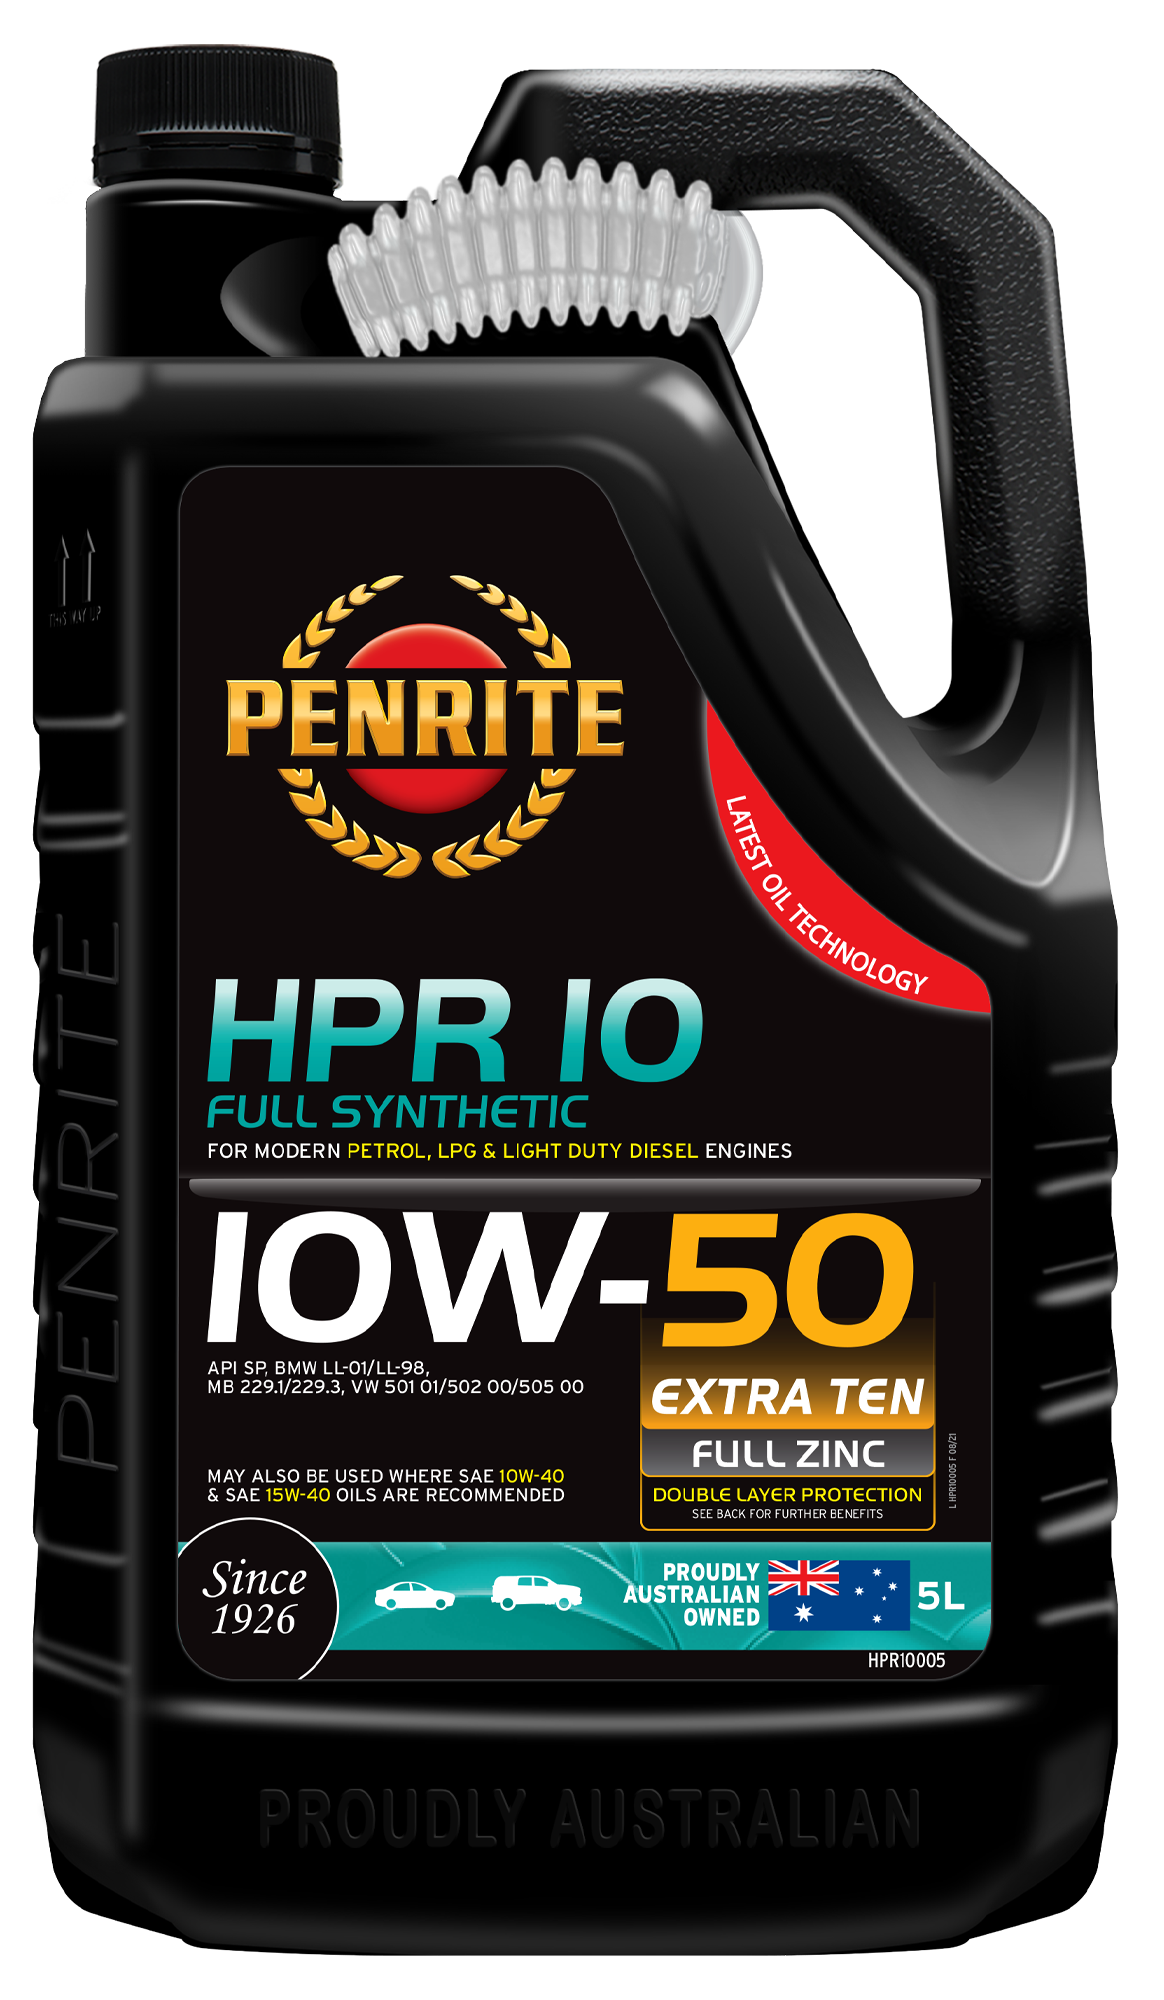 Penrite HPR10 10W-50 (Full Synthetic) Engine Oil